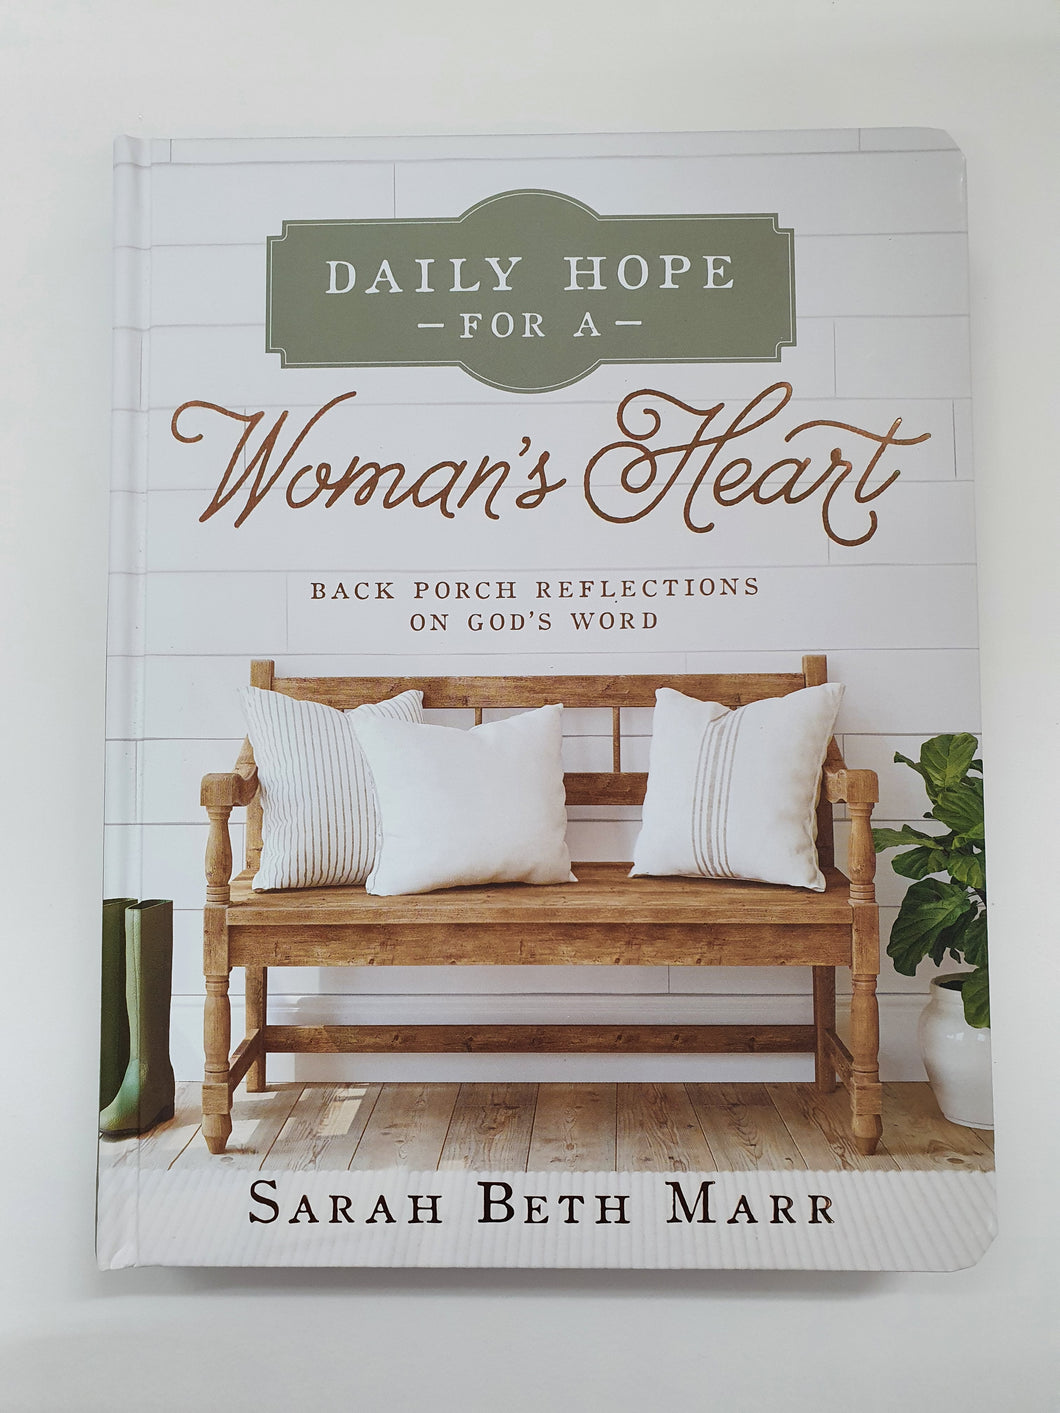 Daily Hope for a Woman's Heart - Back Porch Reflections